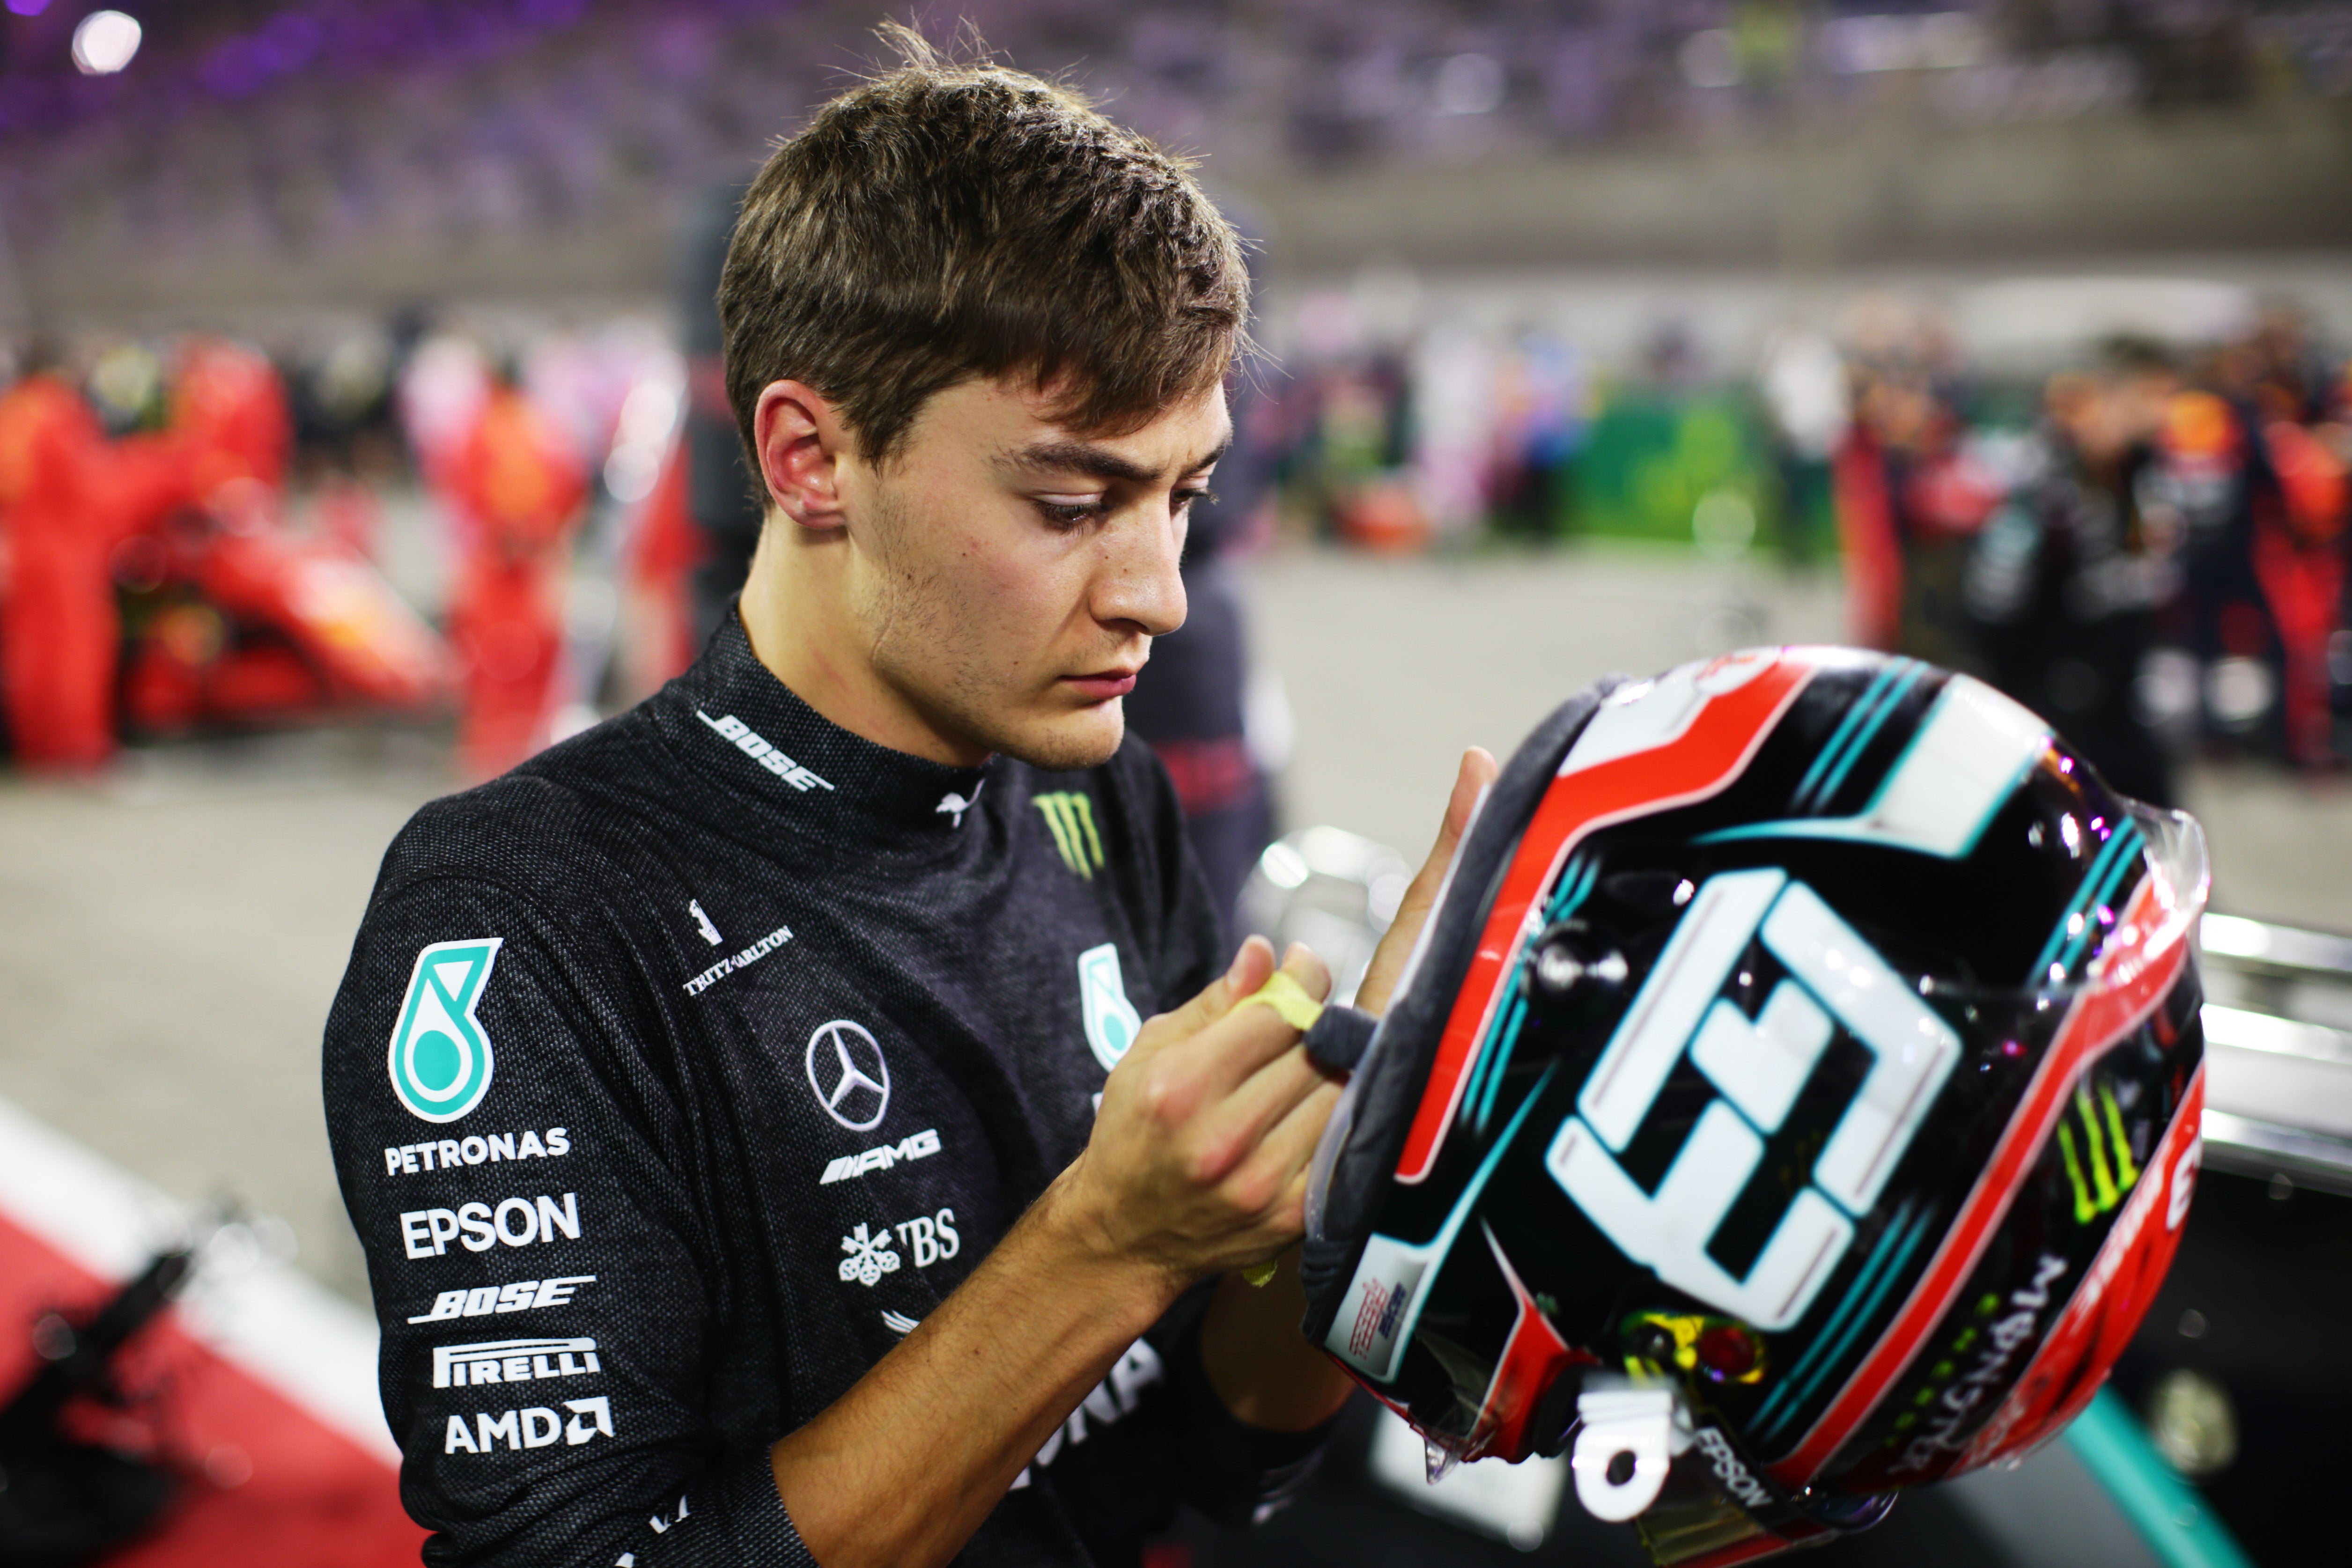 George Russell has joined Mercedes from Williams ahead of the 2022 F1 season